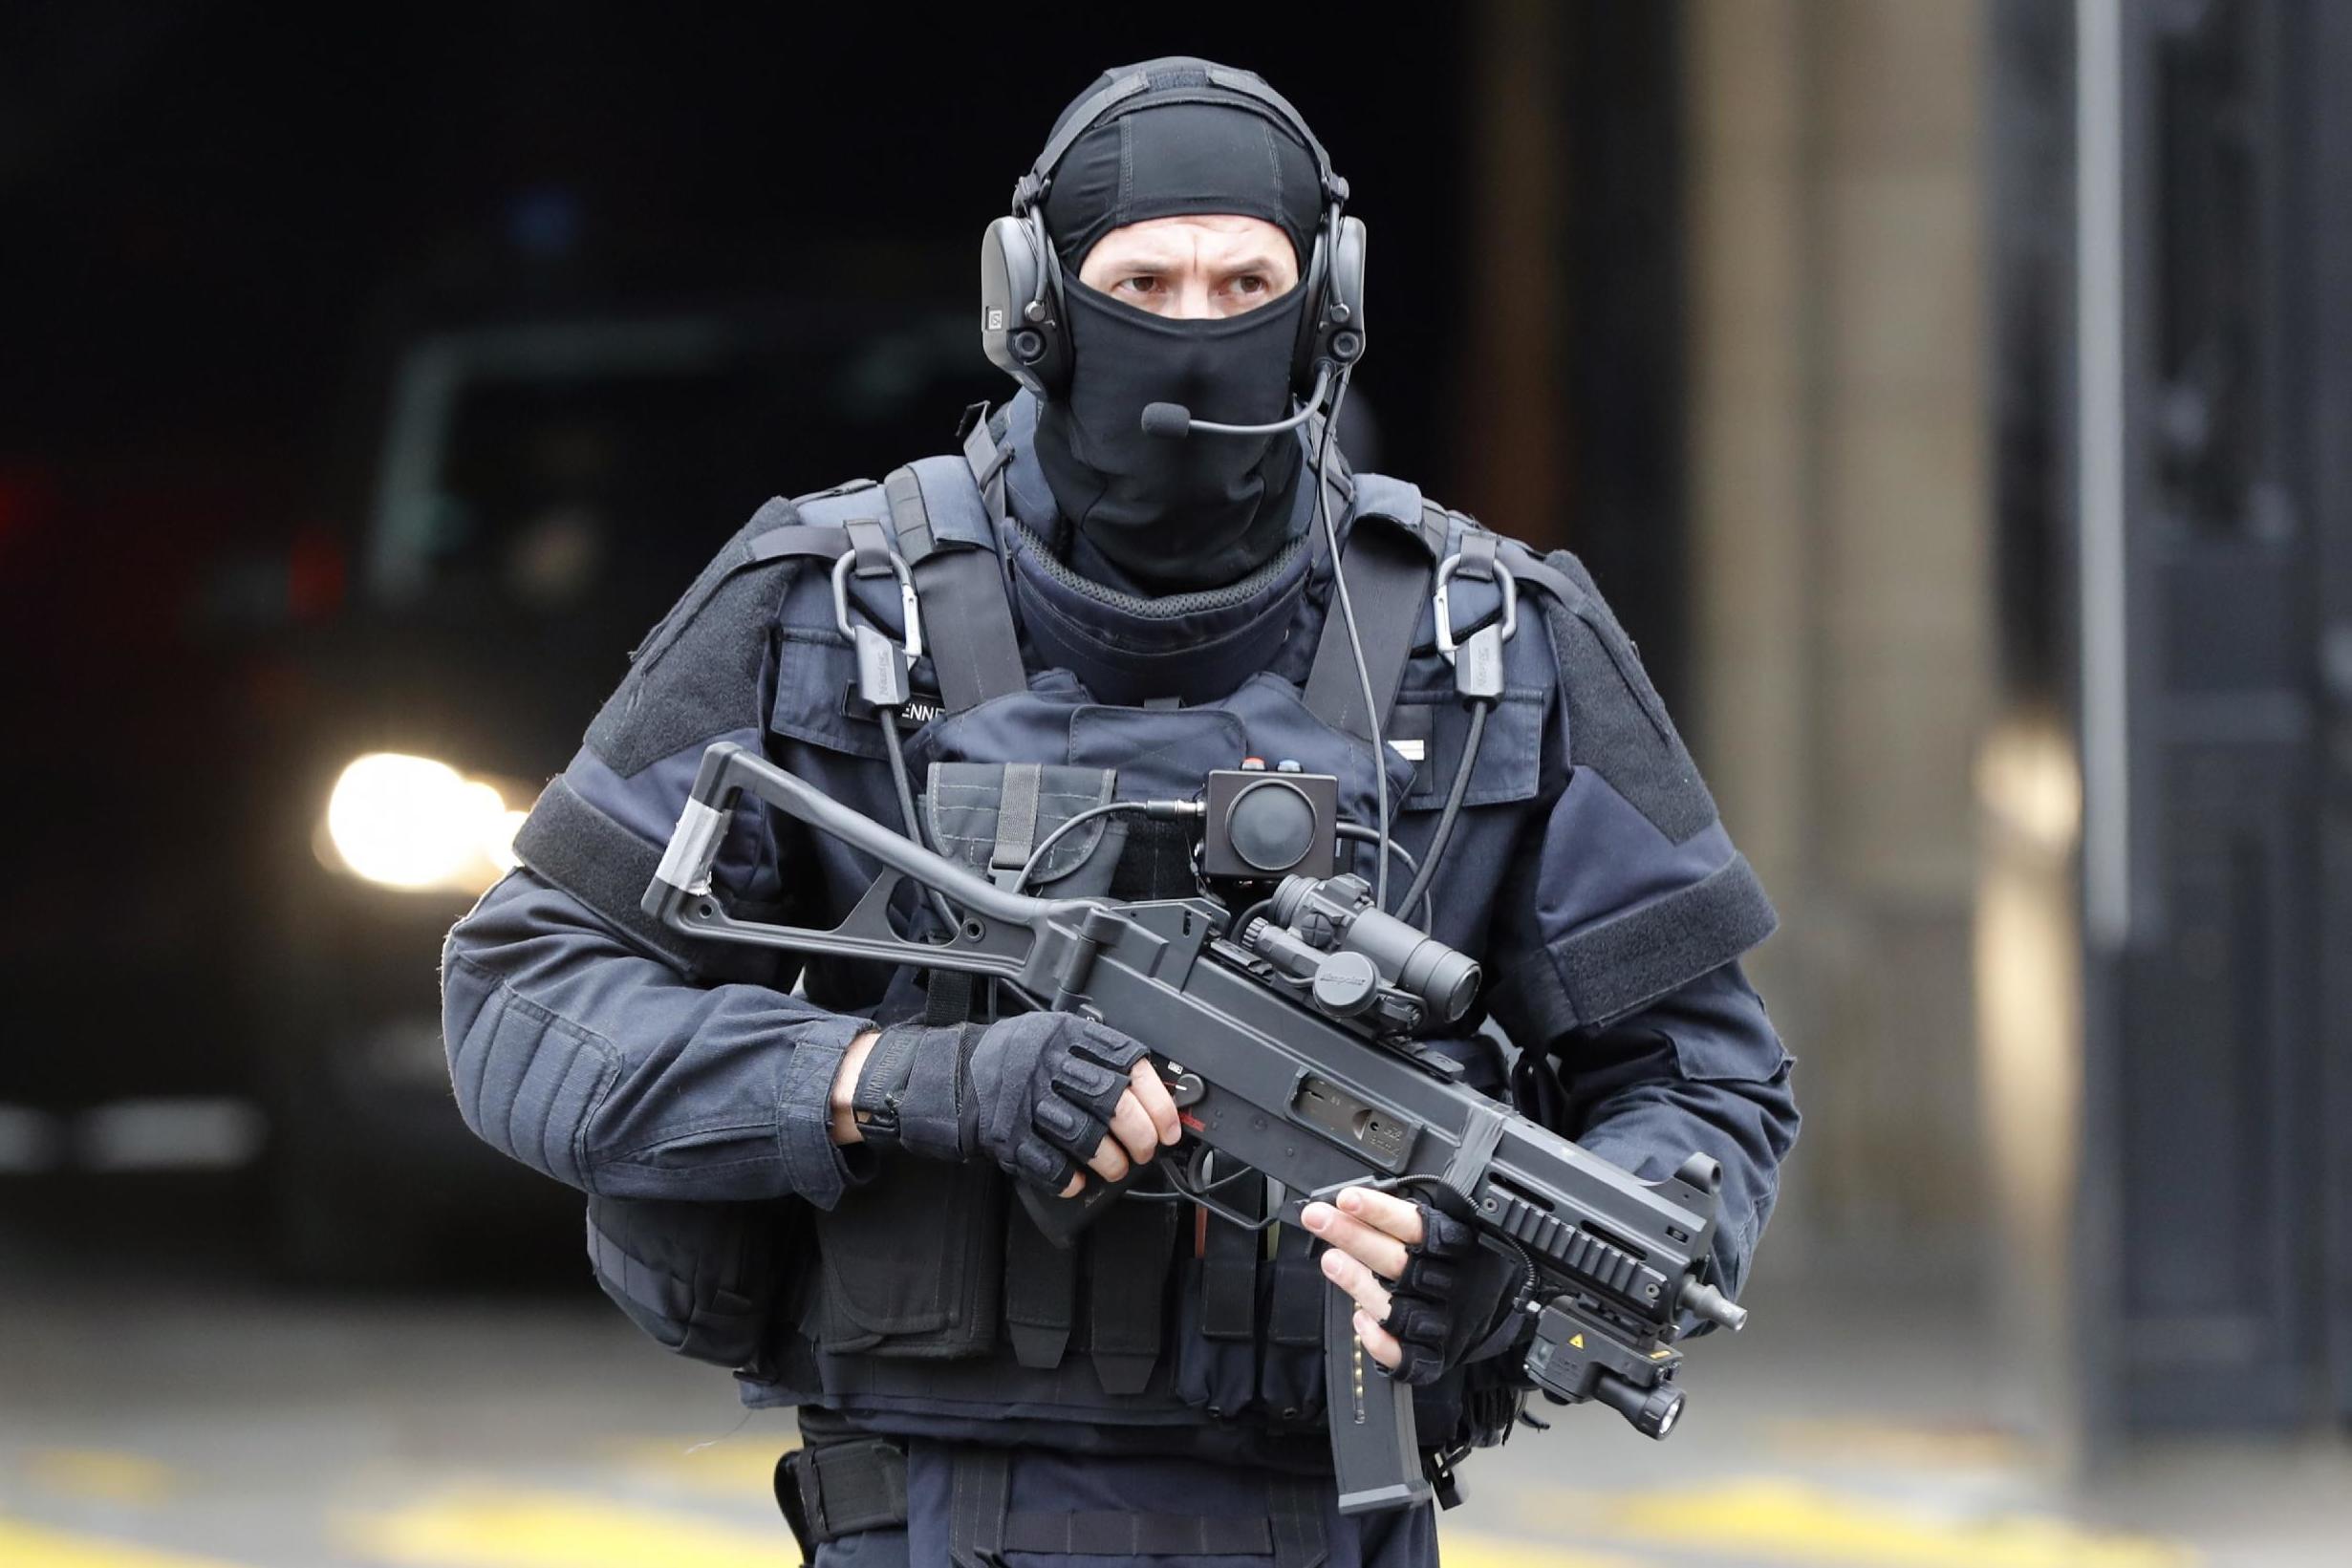 French intelligence services thwart ‘9-11-style terror attack’ | The ...